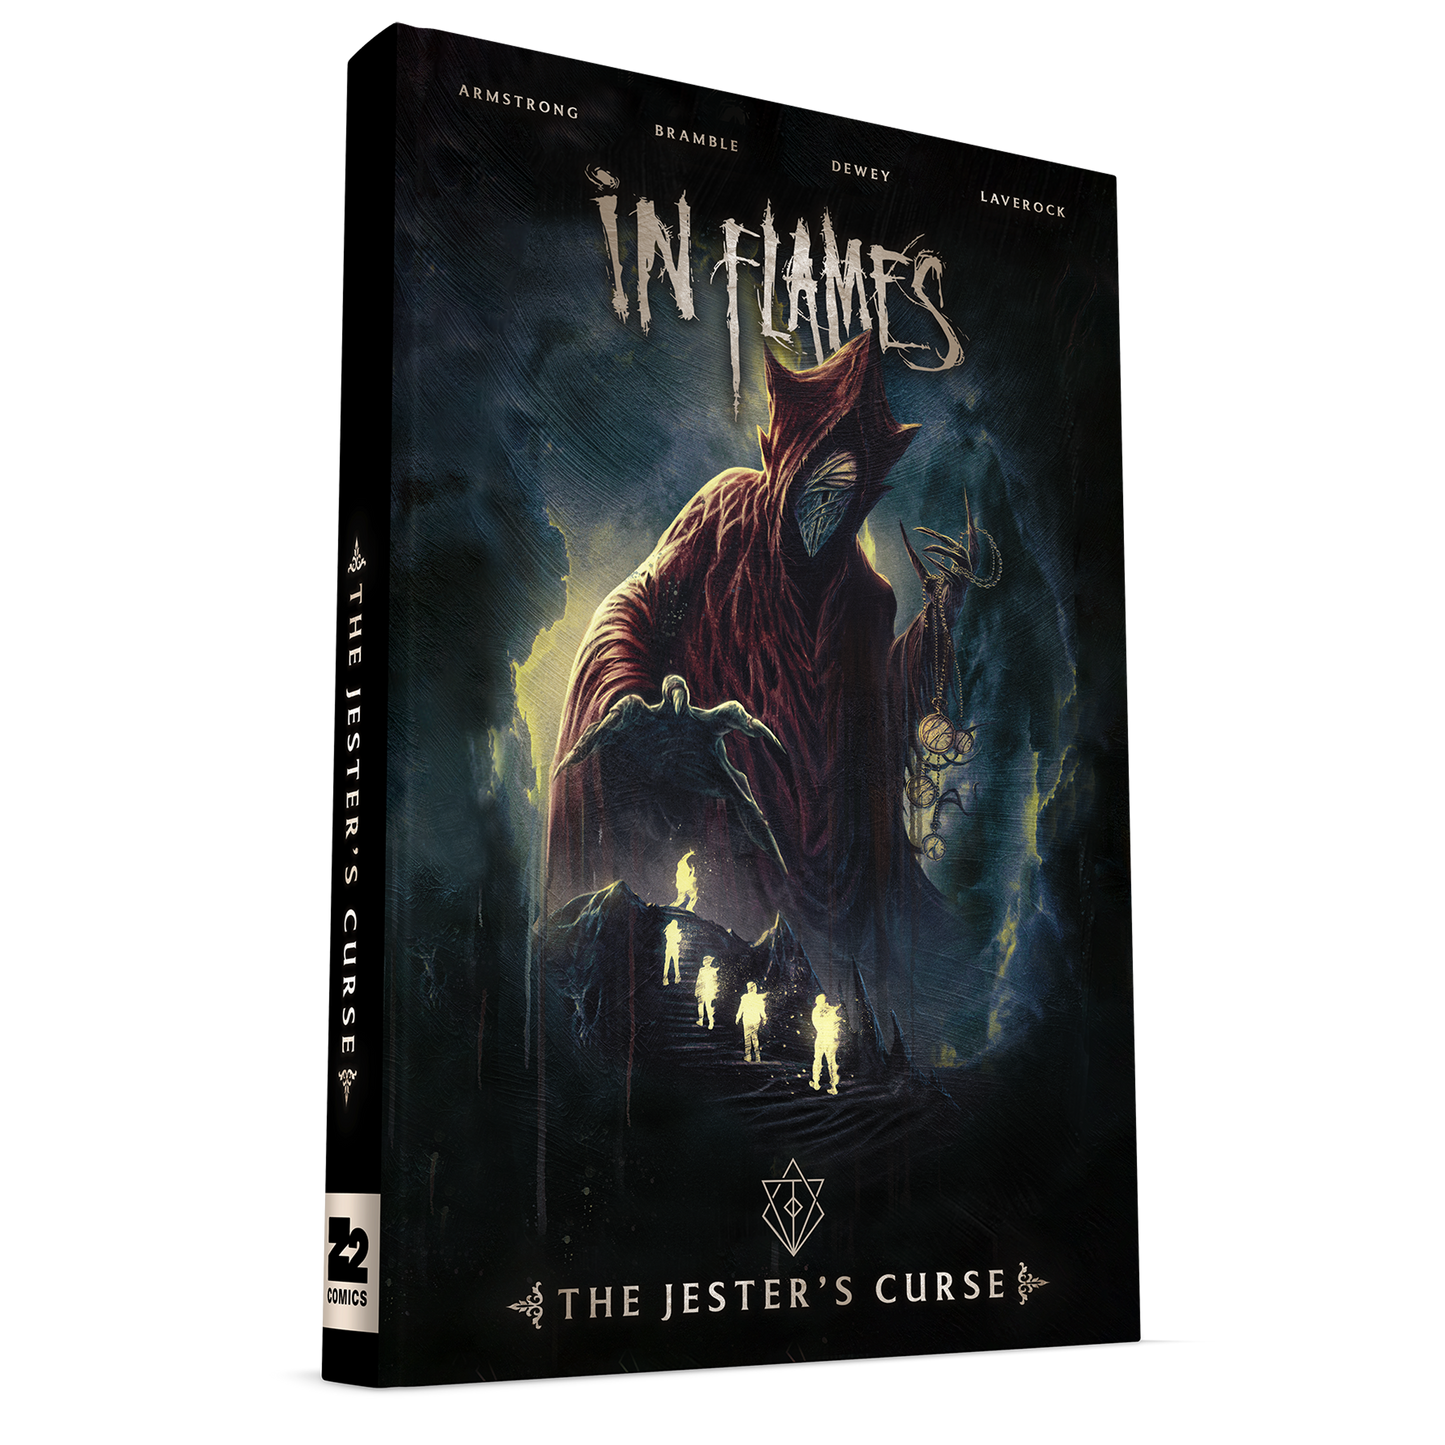 In Flames Presents: The Jester's Curse 그래픽 노블